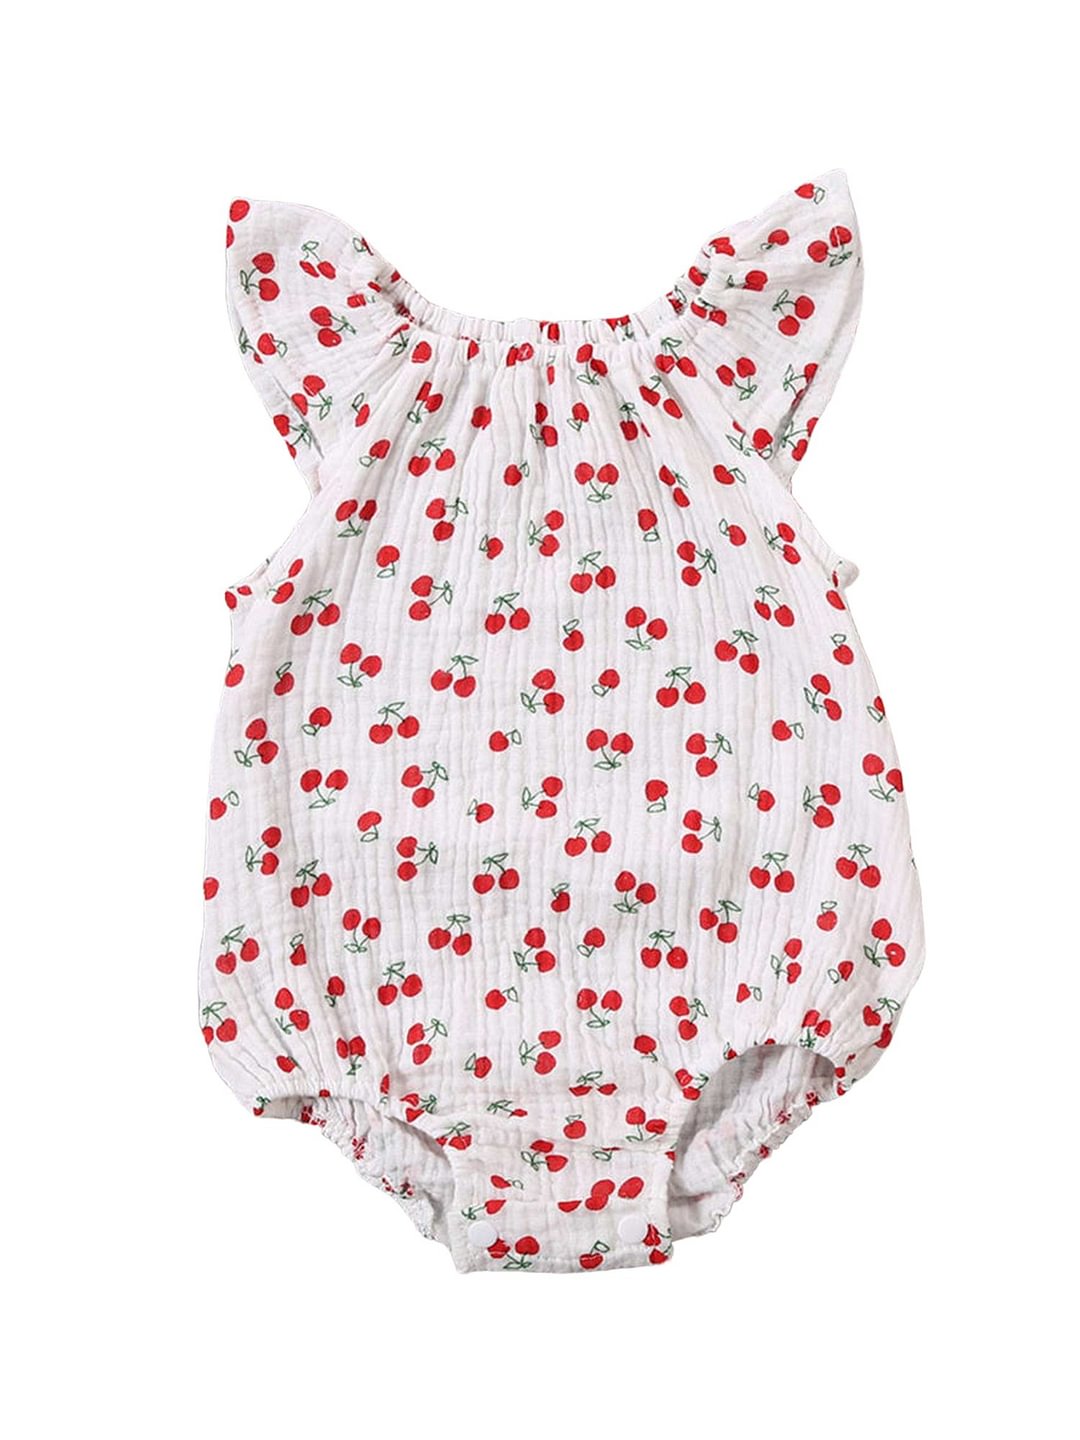 2020 Baby Summer Clothing Toddler Kids Baby Girls Floral Jumpsuit Playsuit Bodysuit Cotton Linen Shorts Clothes